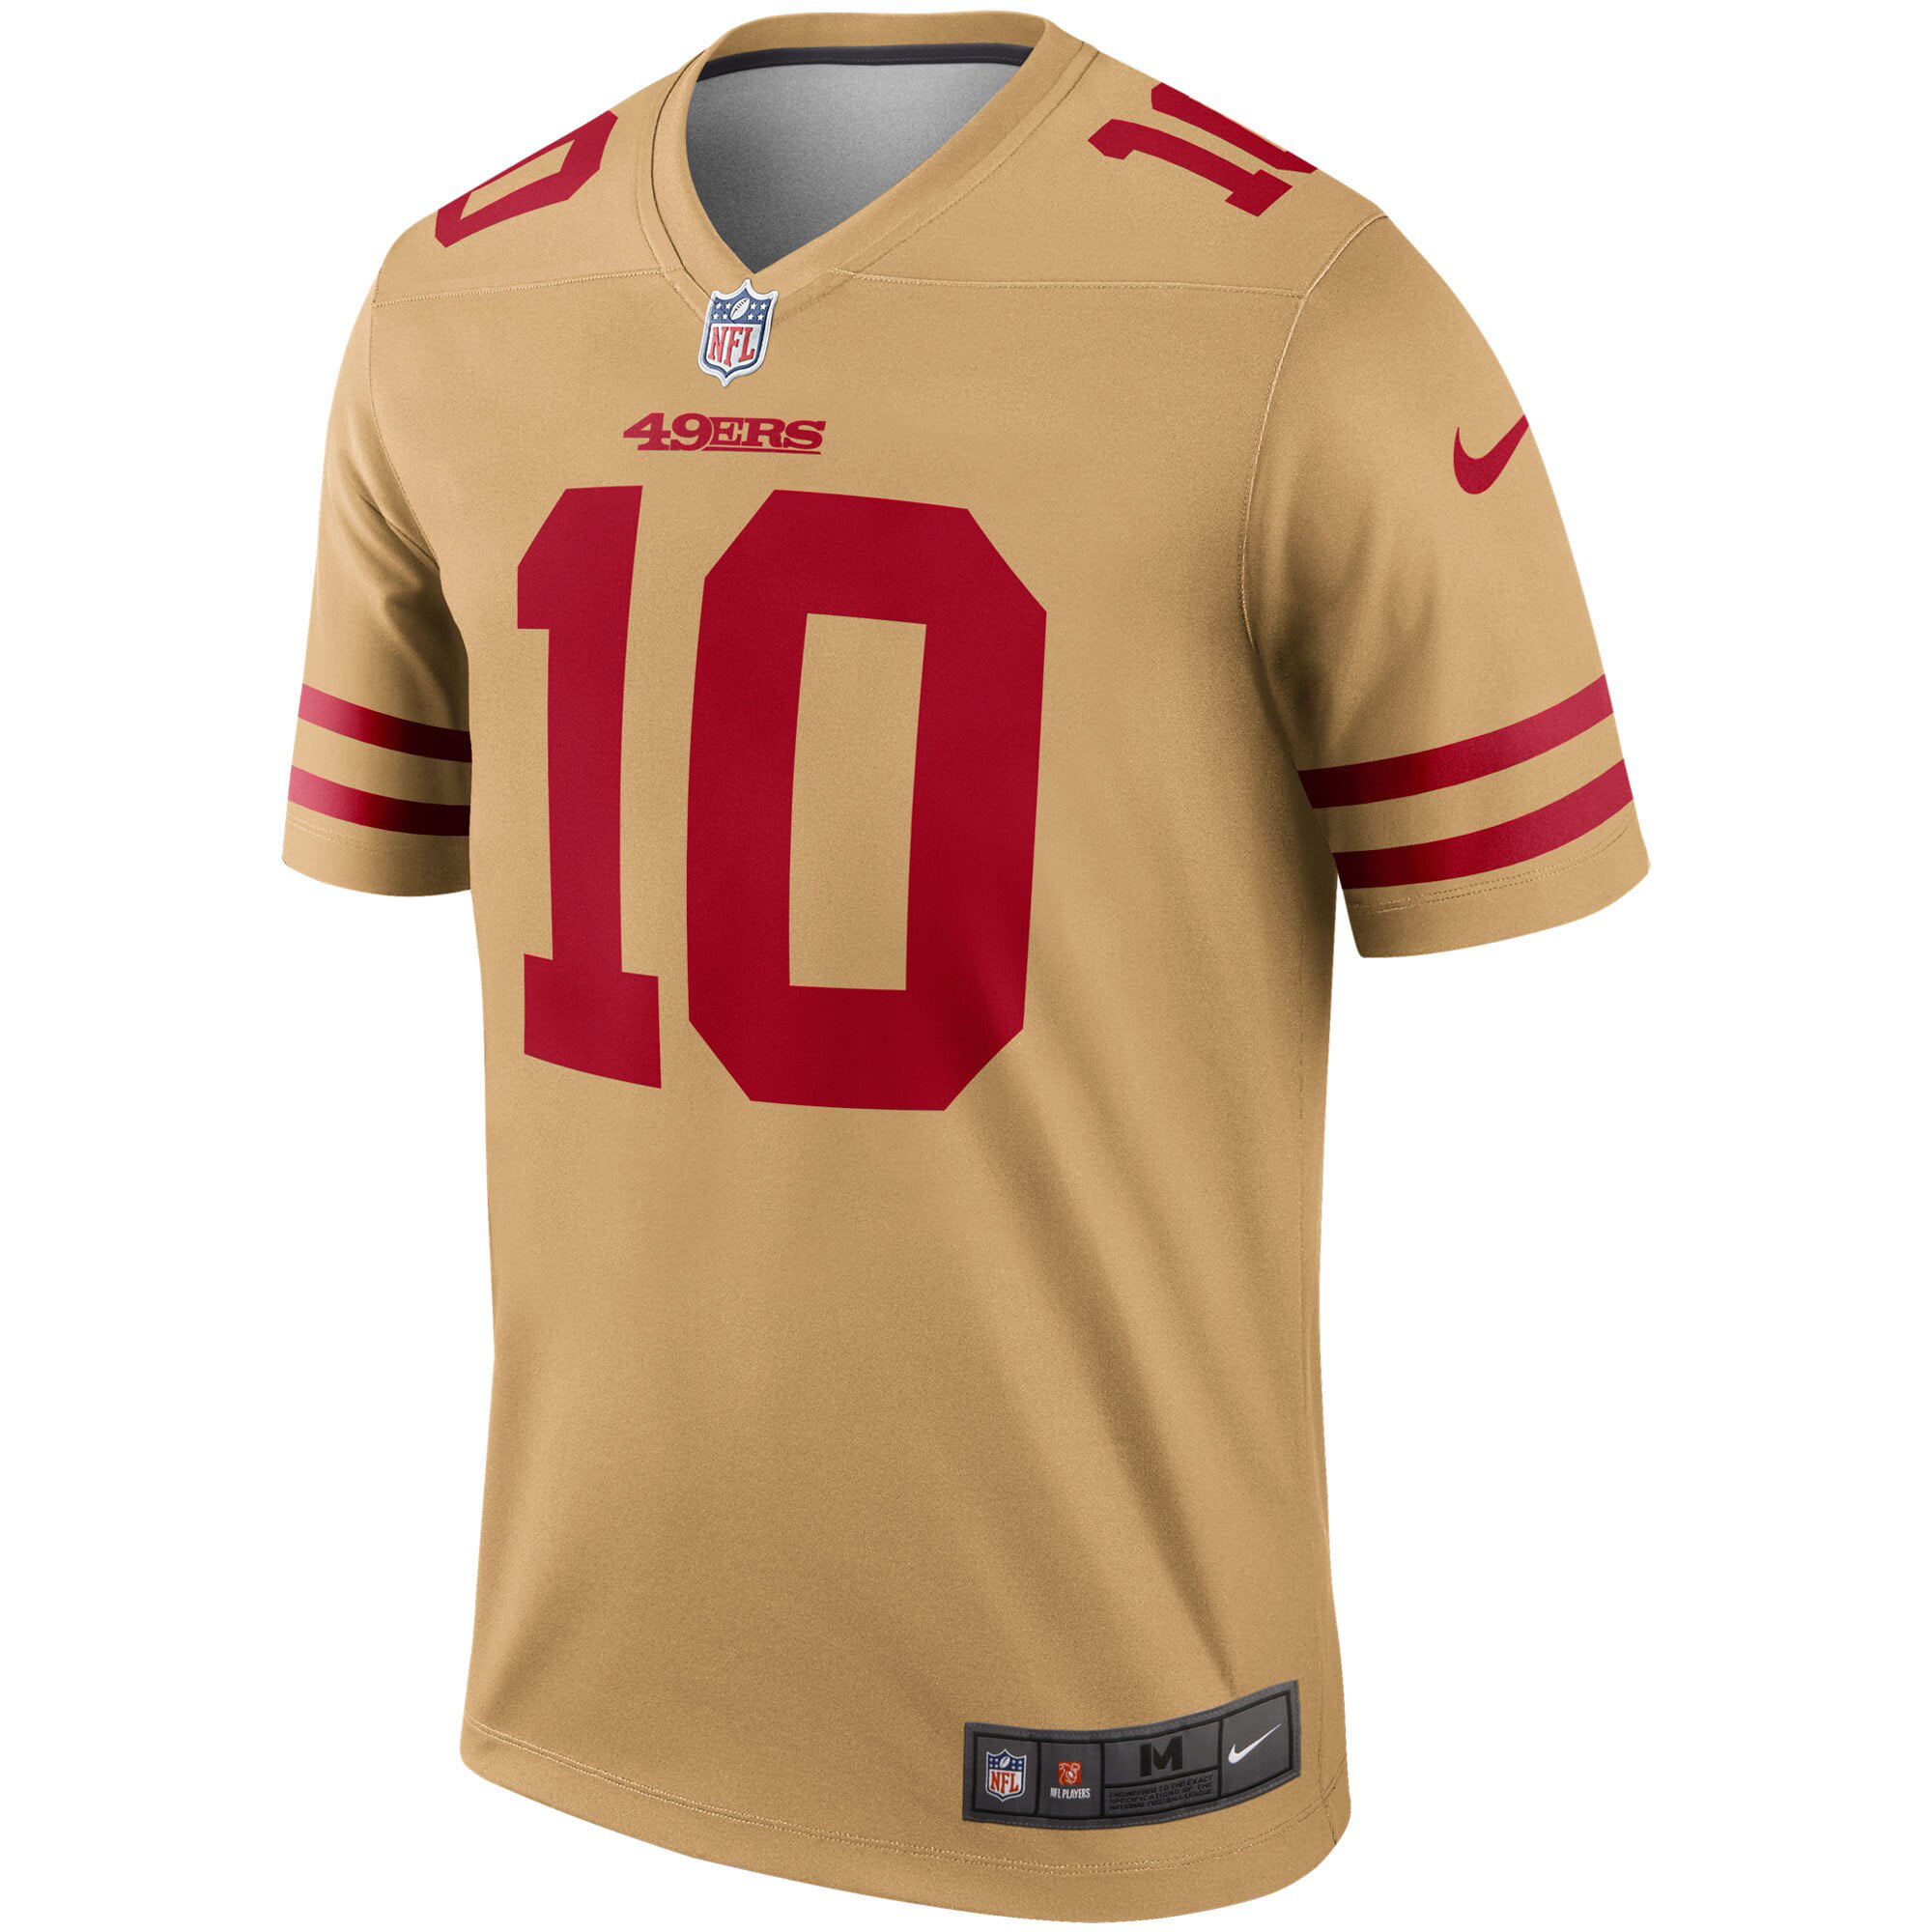 49ers inverted jersey